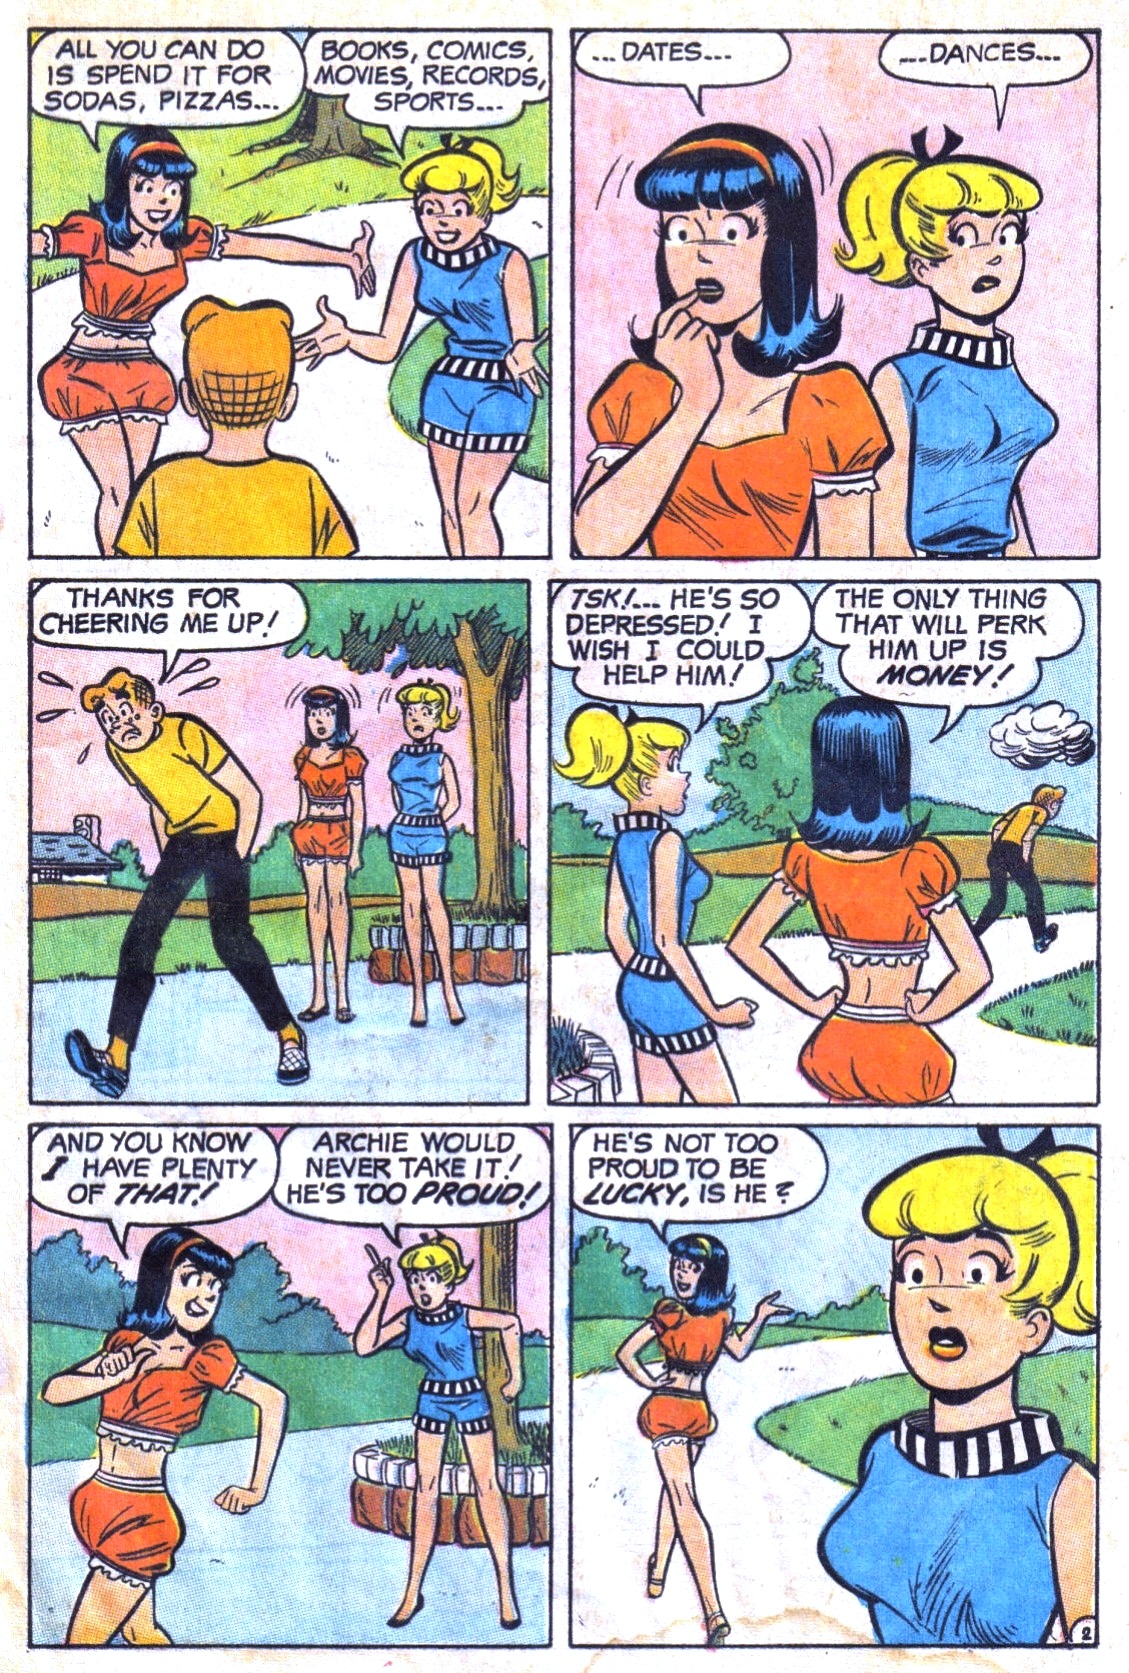 Archie (1960) 186 Page 29